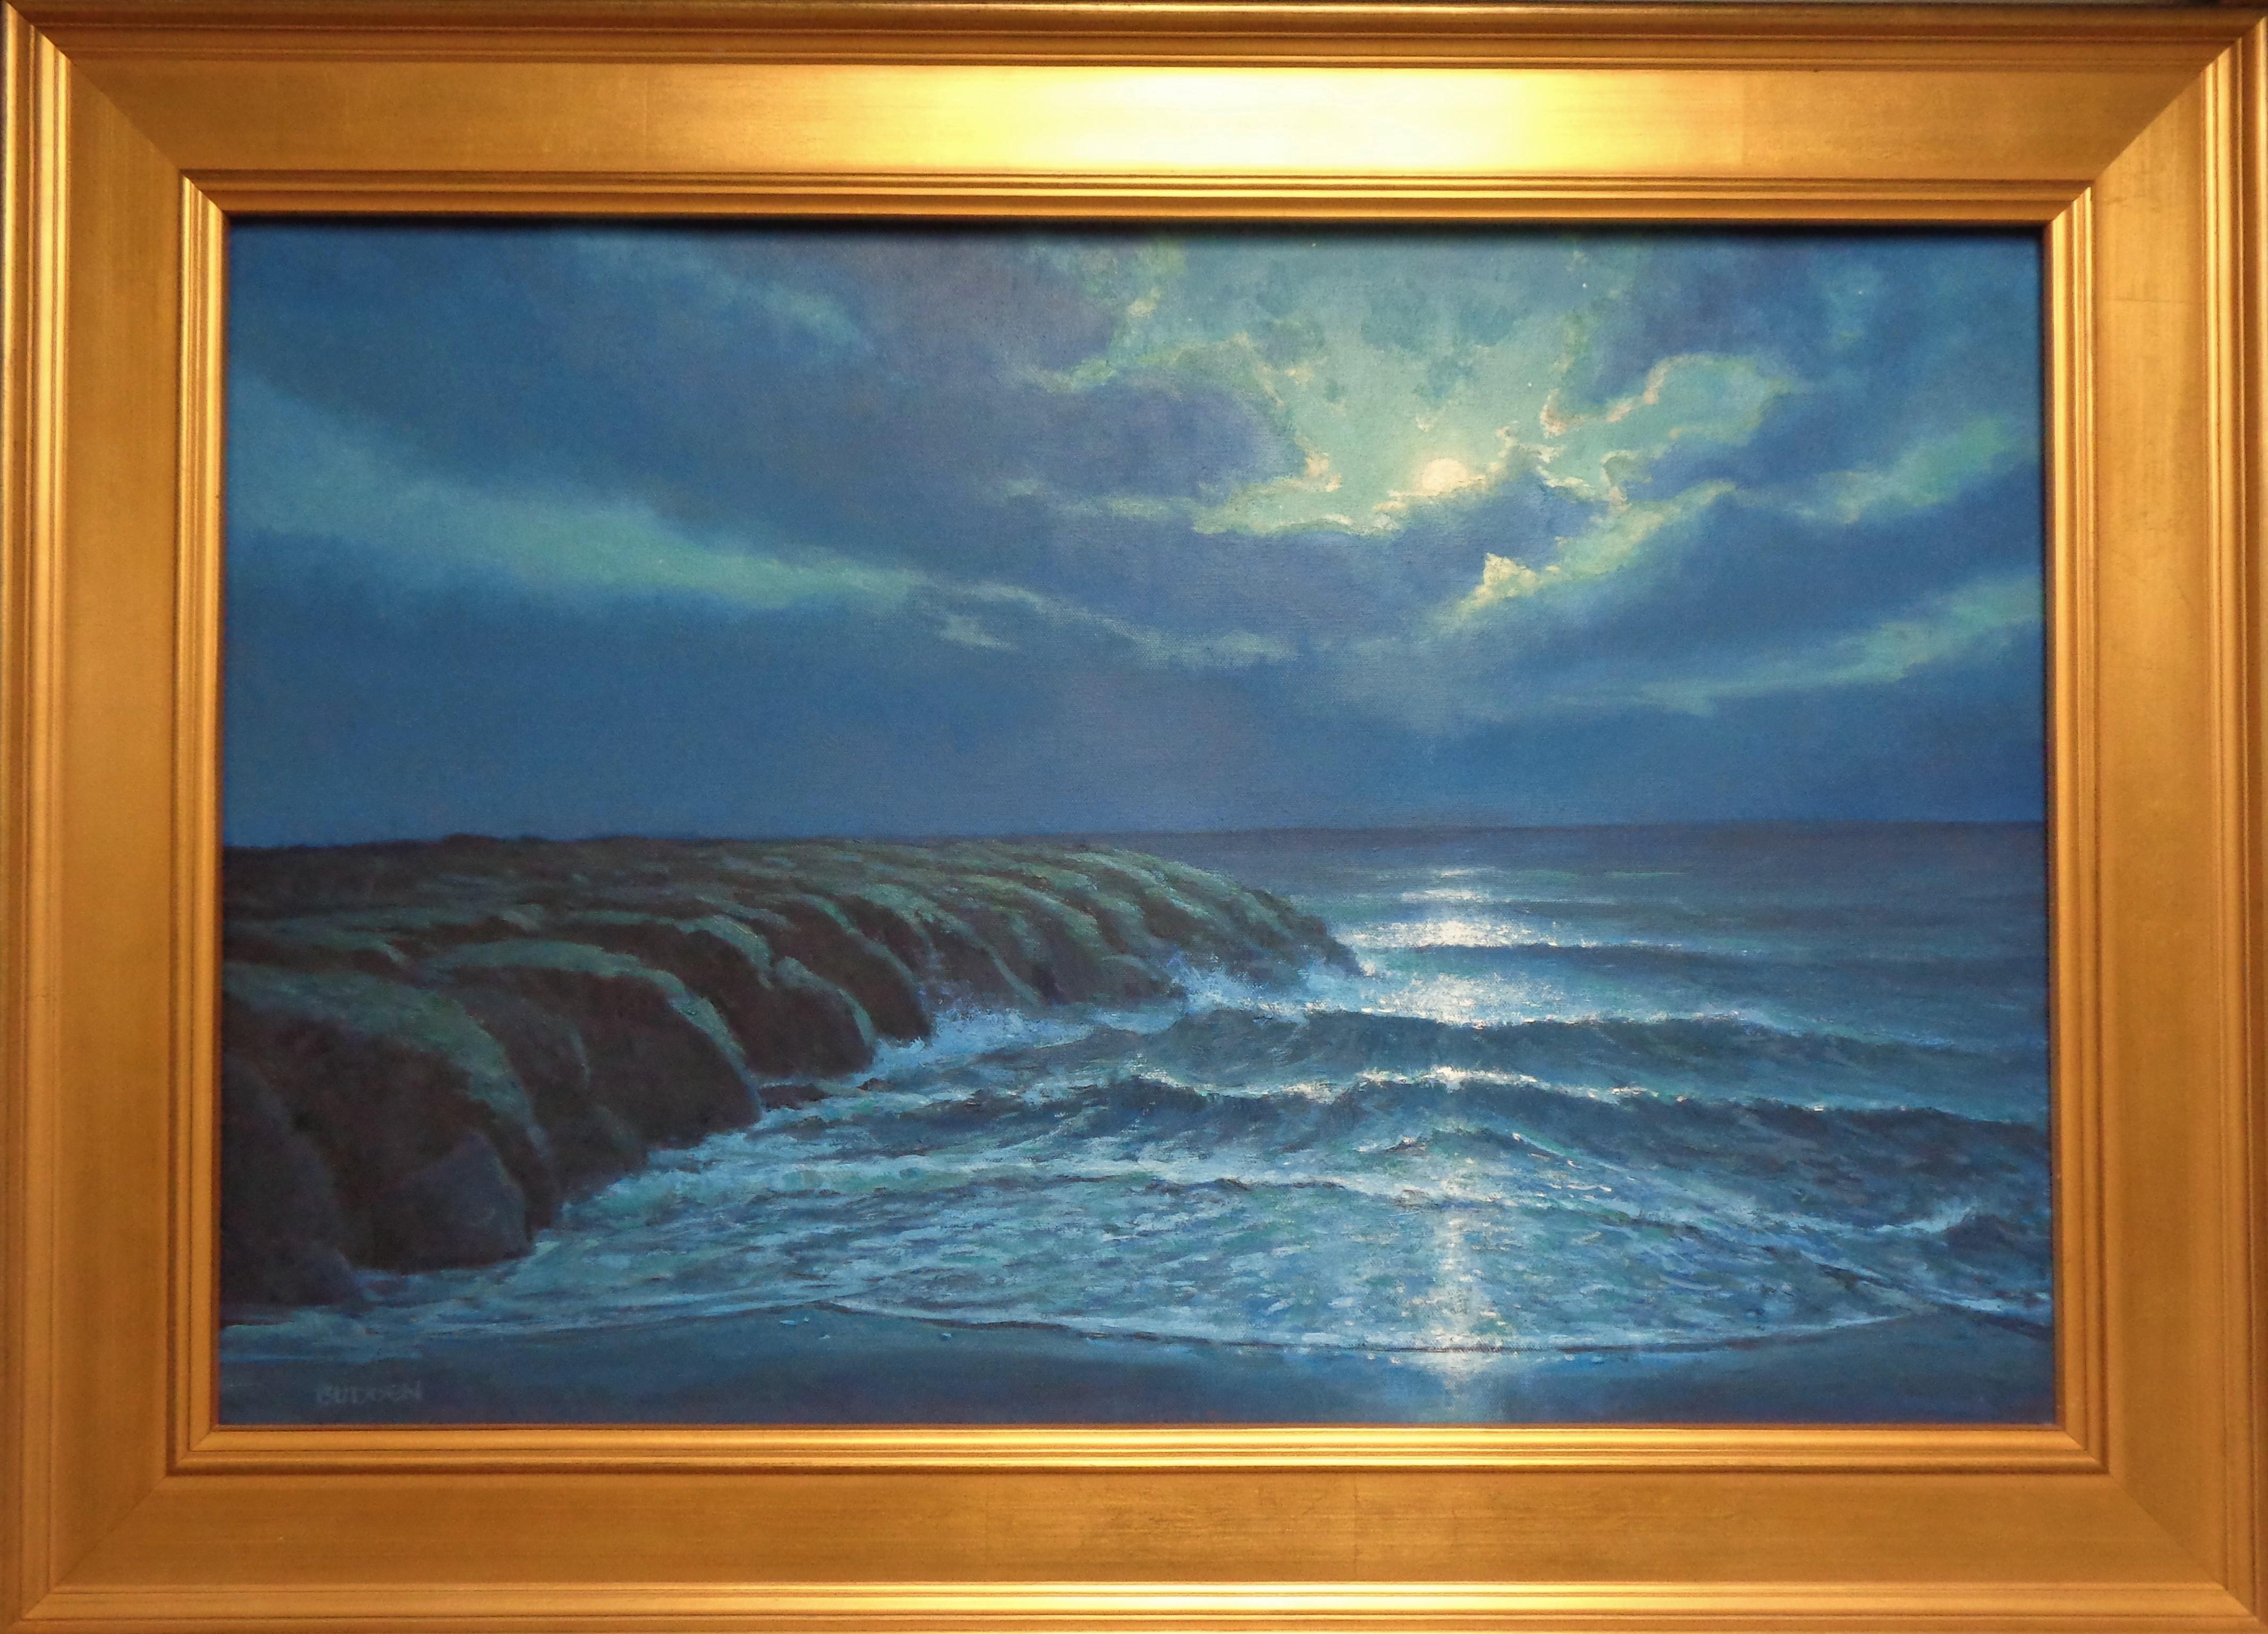 Moonlight Serenade
oil/canvas
20 x 30 image size
26 x 36 framed.
An oil painting on canvas by award winning contemporary artist Michael Budden that showcases a romantic moonlit seascape created in an impressionistic realism style with wonderful